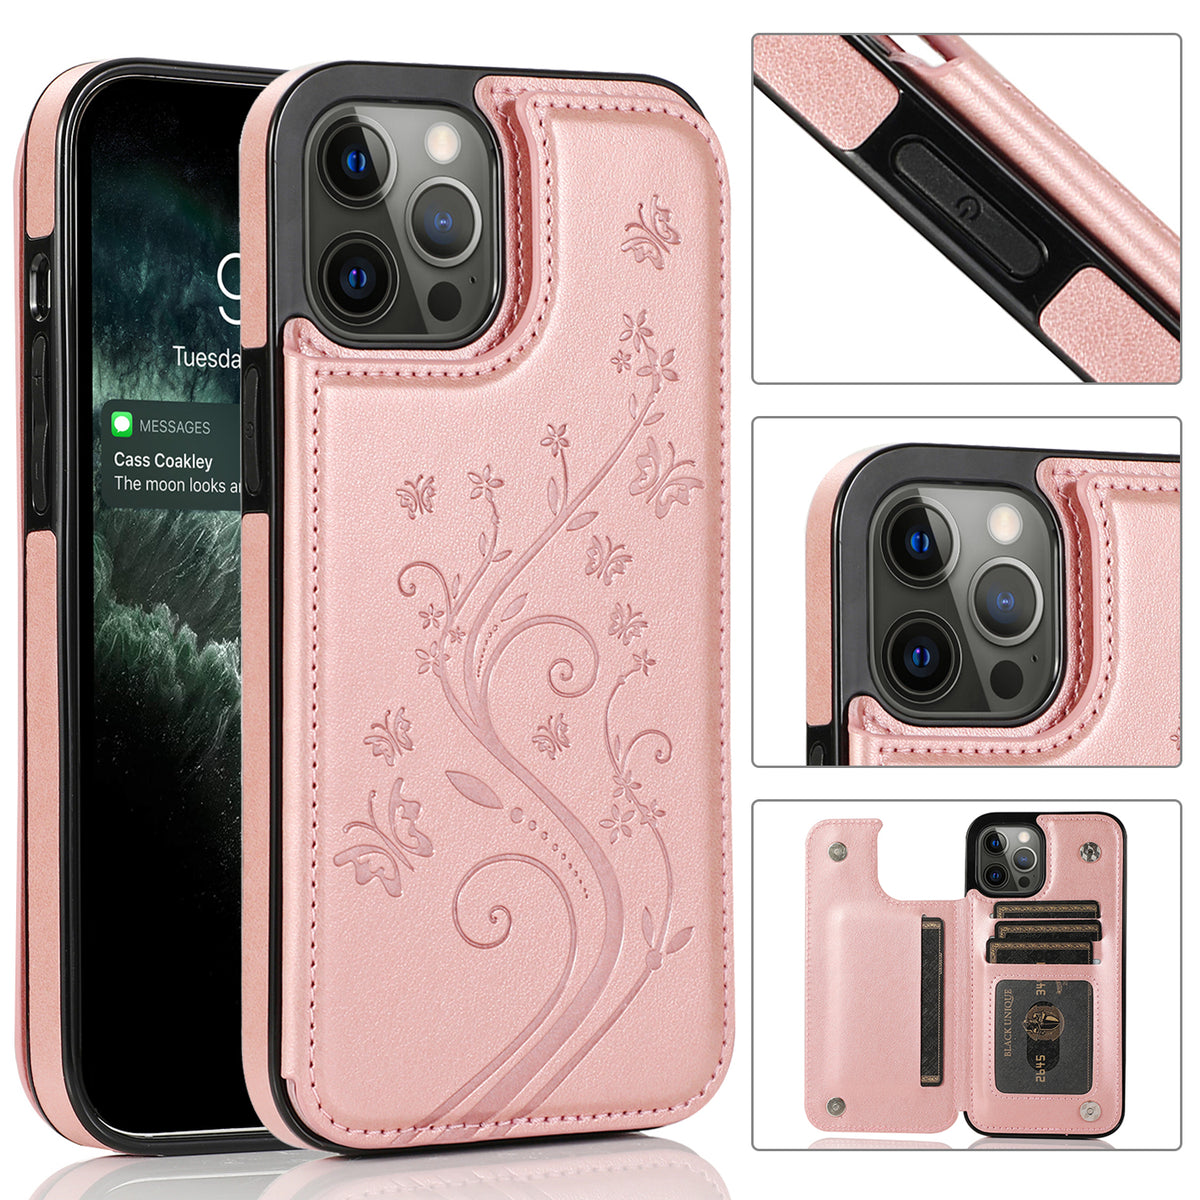 Iphone 12Pro Max ( 6.7Inch) Backflip Design Leather Case Rose Gold